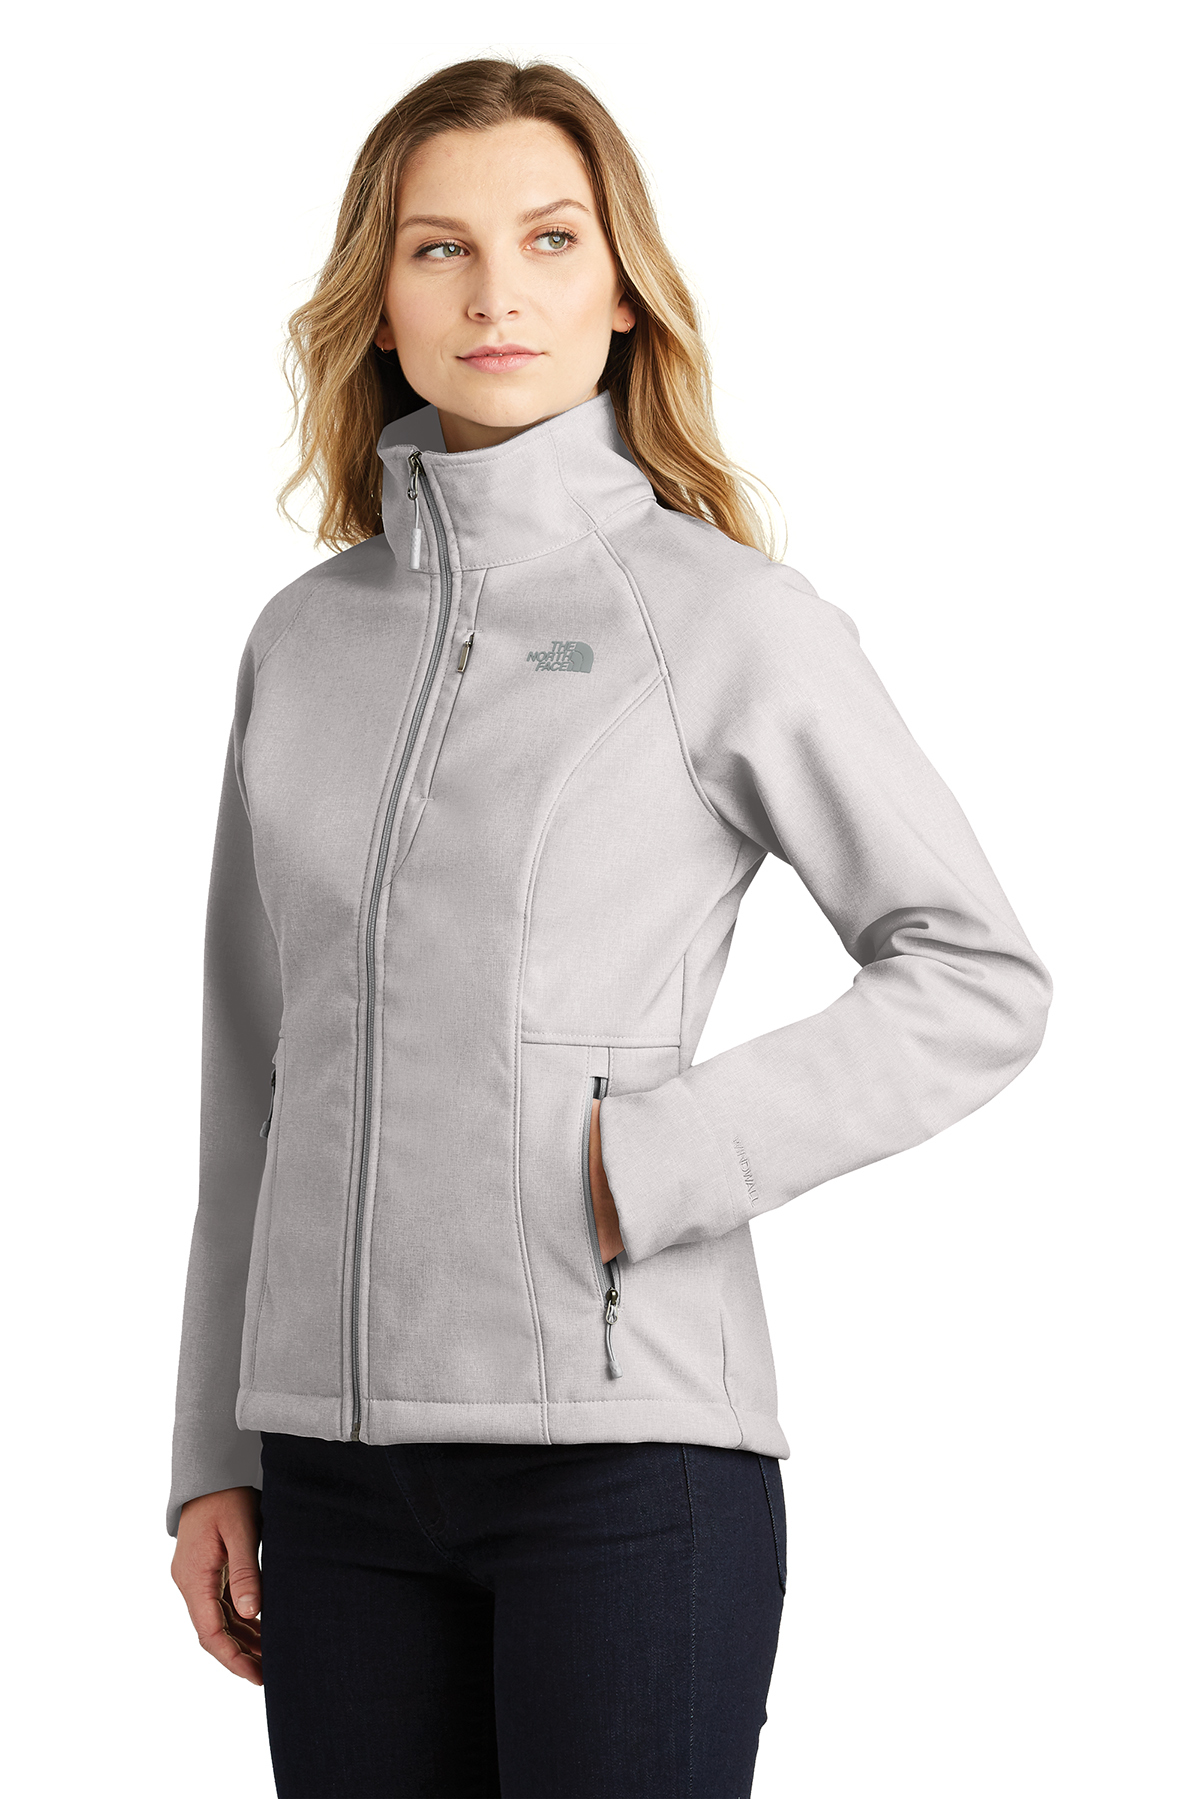 Ladies Apex Barrier Soft Shell Jacket 